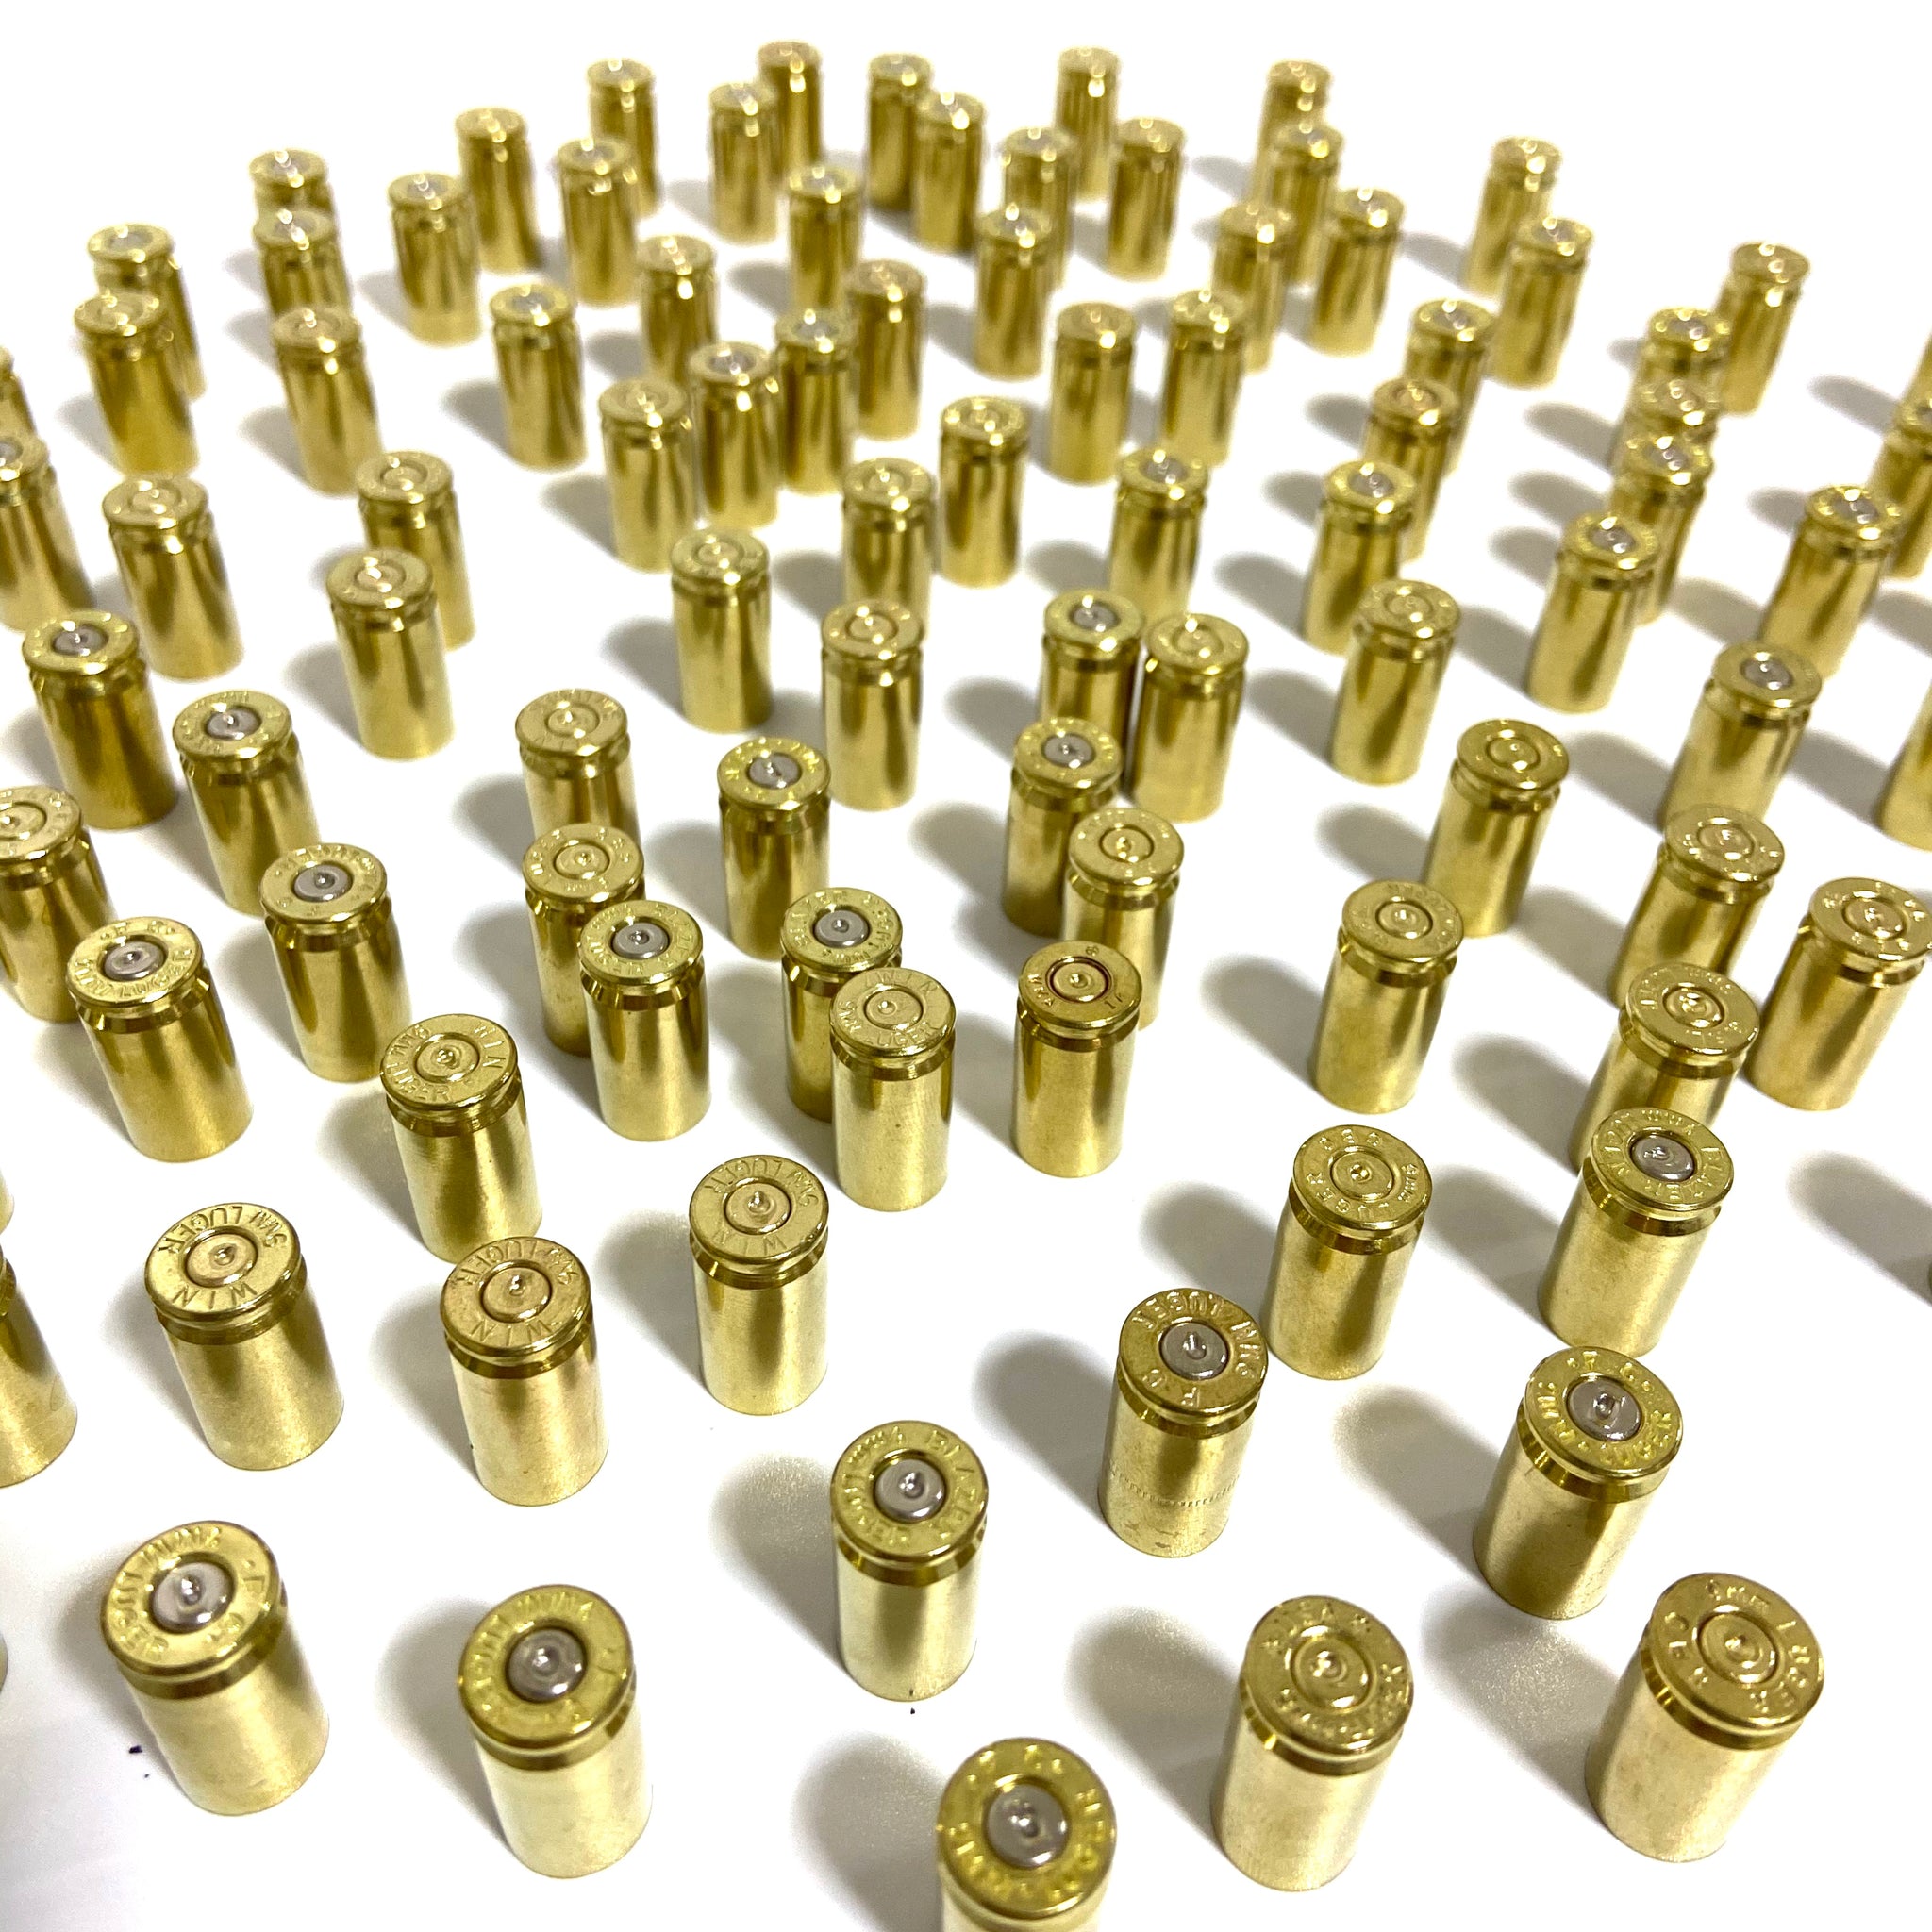 9MM Brass Shells Polished Empty Used Casings Luger 9X19 DIY Bullet Jewelry  –